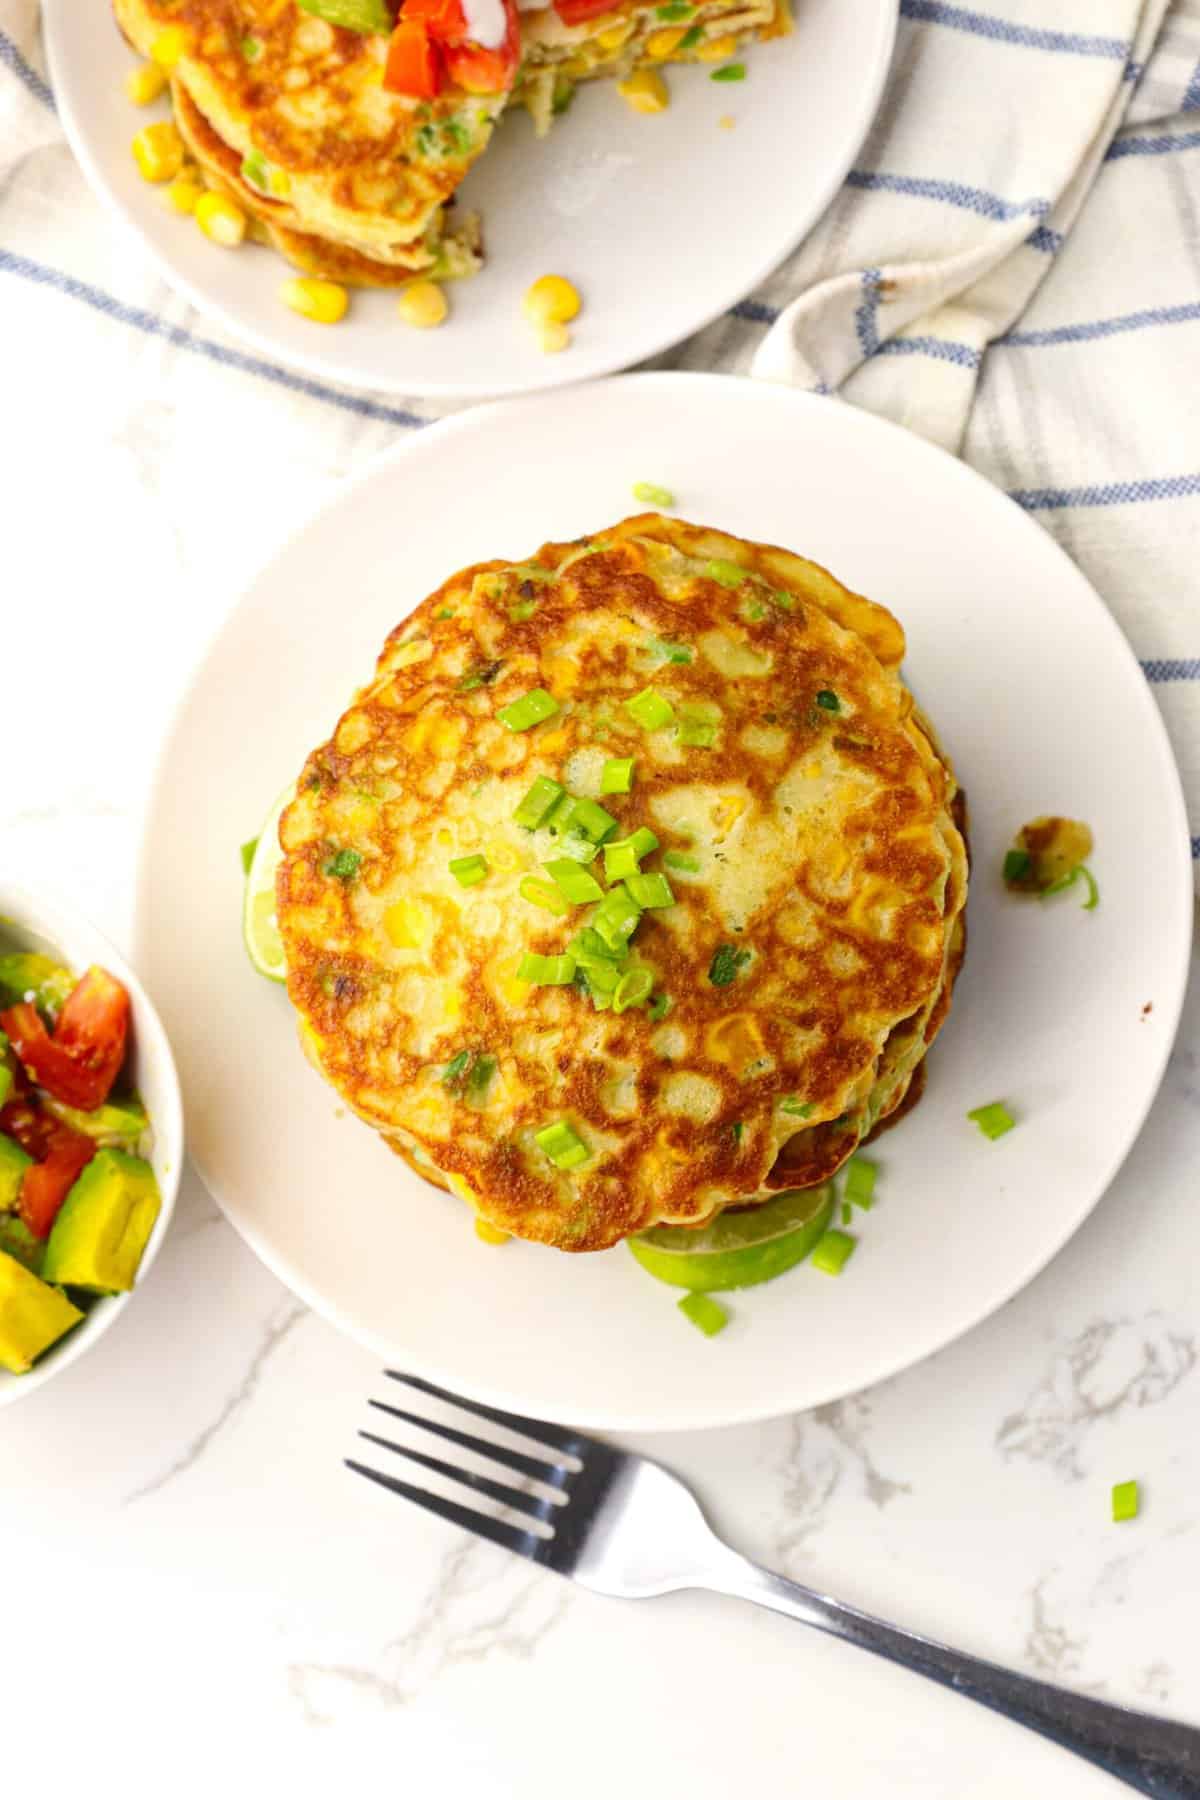 Getting ready to add toppings to a stack of savory, buttery, and slightly sweet corn cakes